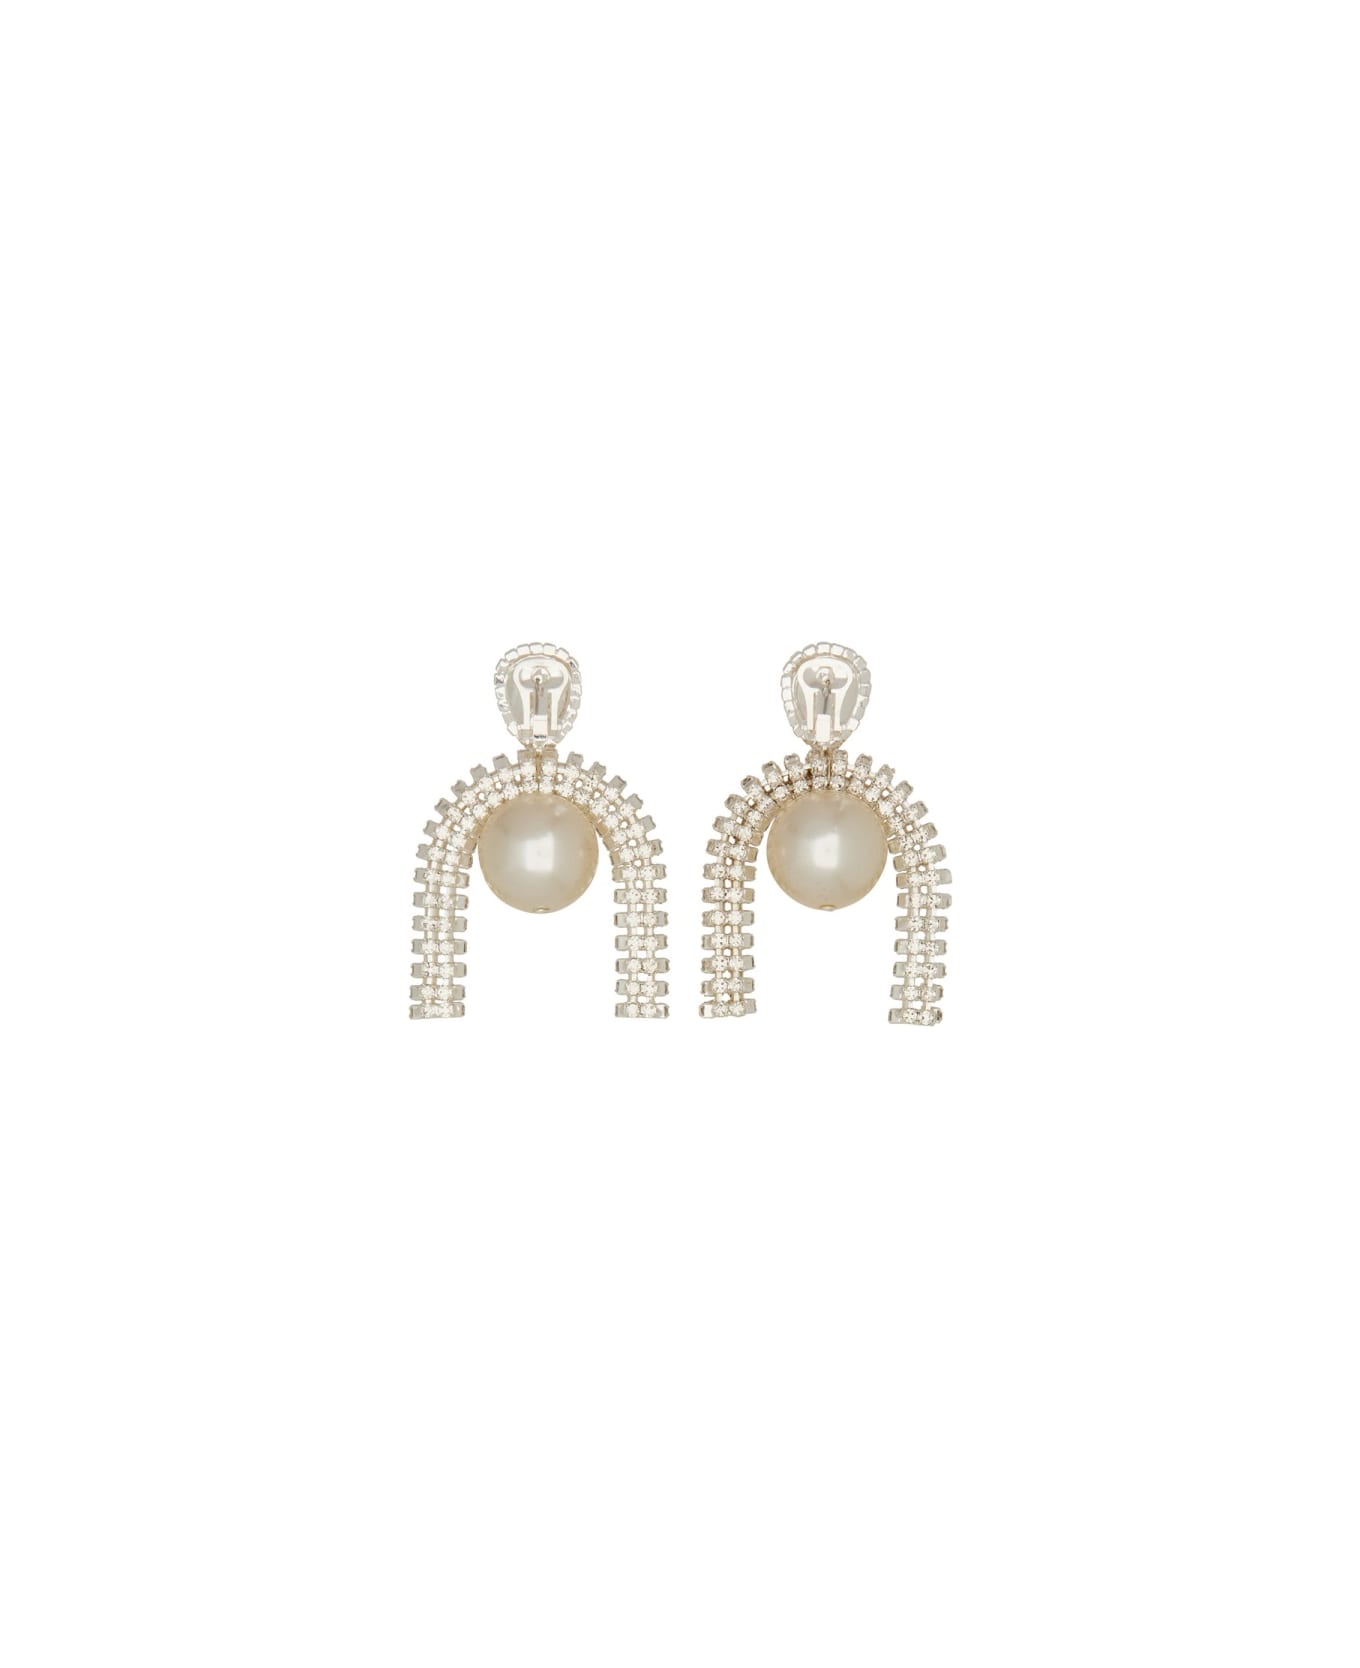 Magda Butrym Earrings With Pendants - SILVER イヤリング